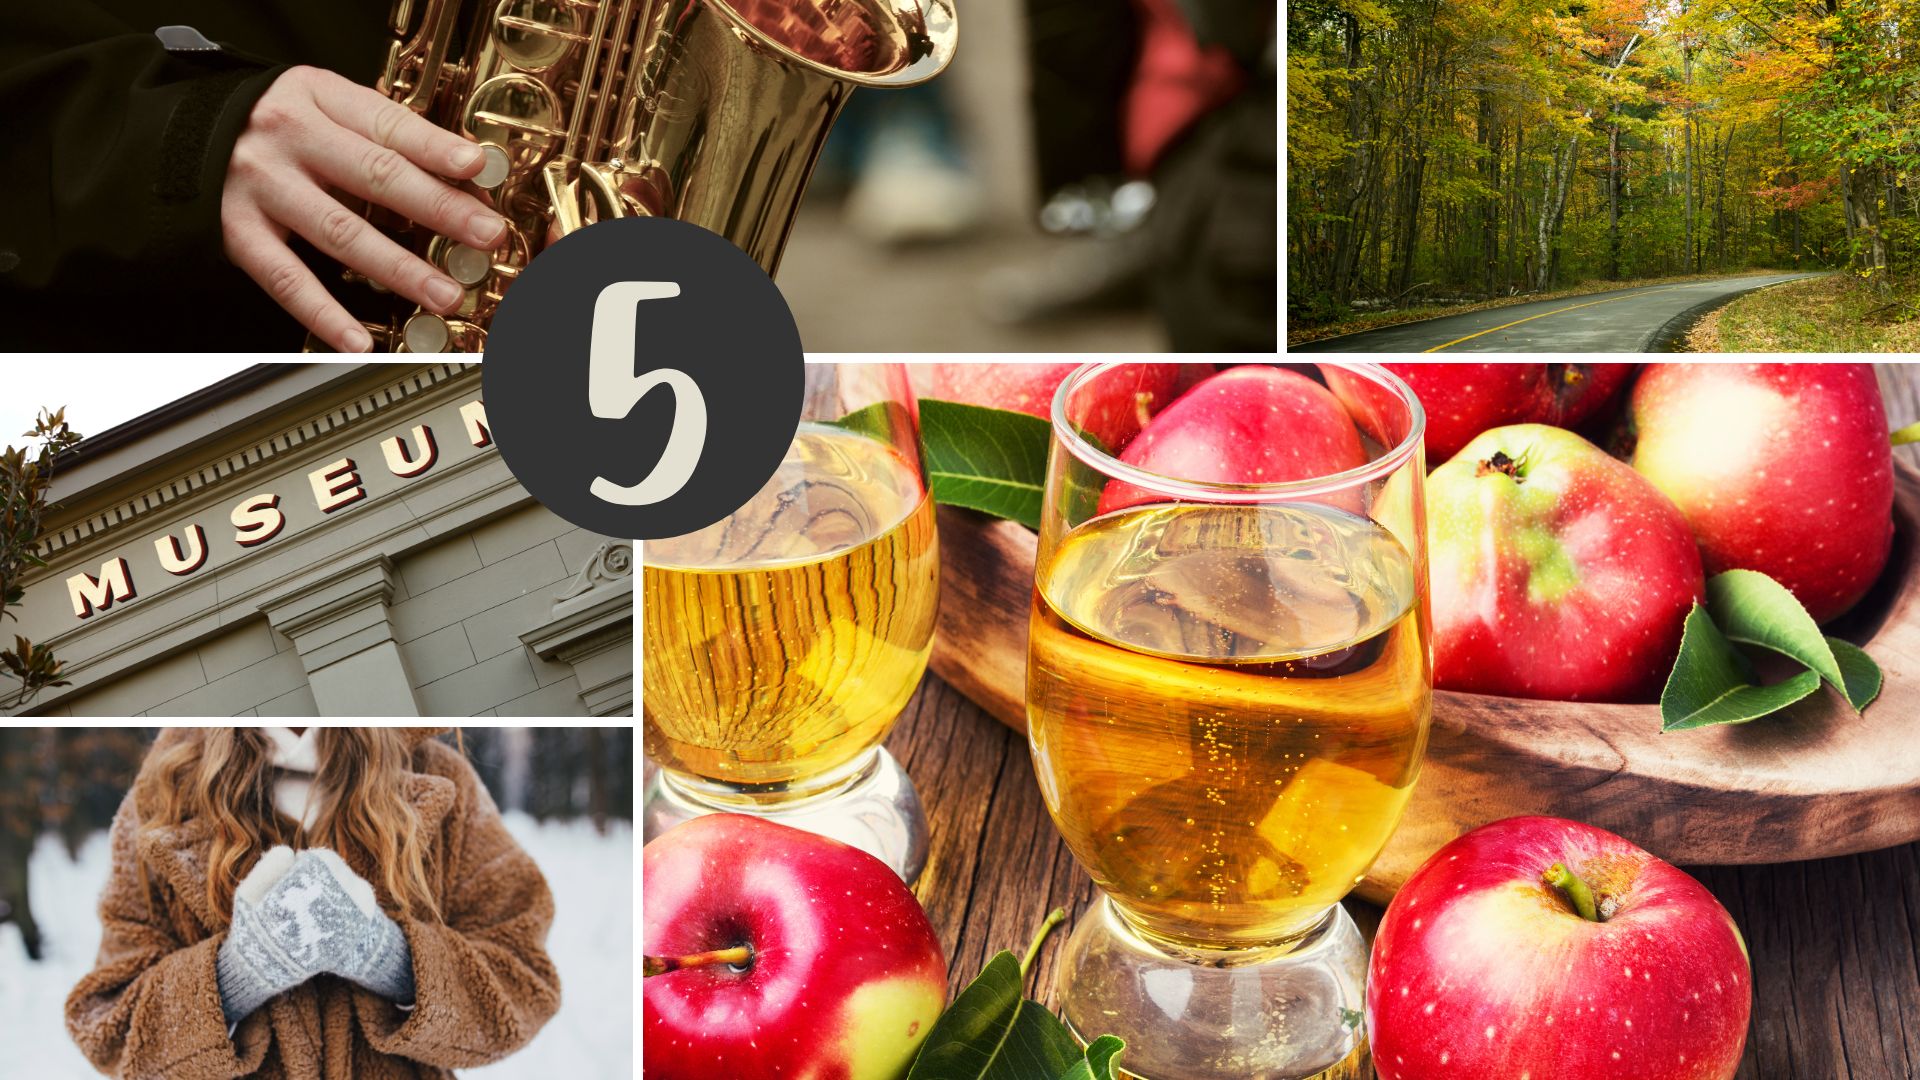 Apple cider, gloves & scarf, museum, sax, road winding through woods with fall foliage